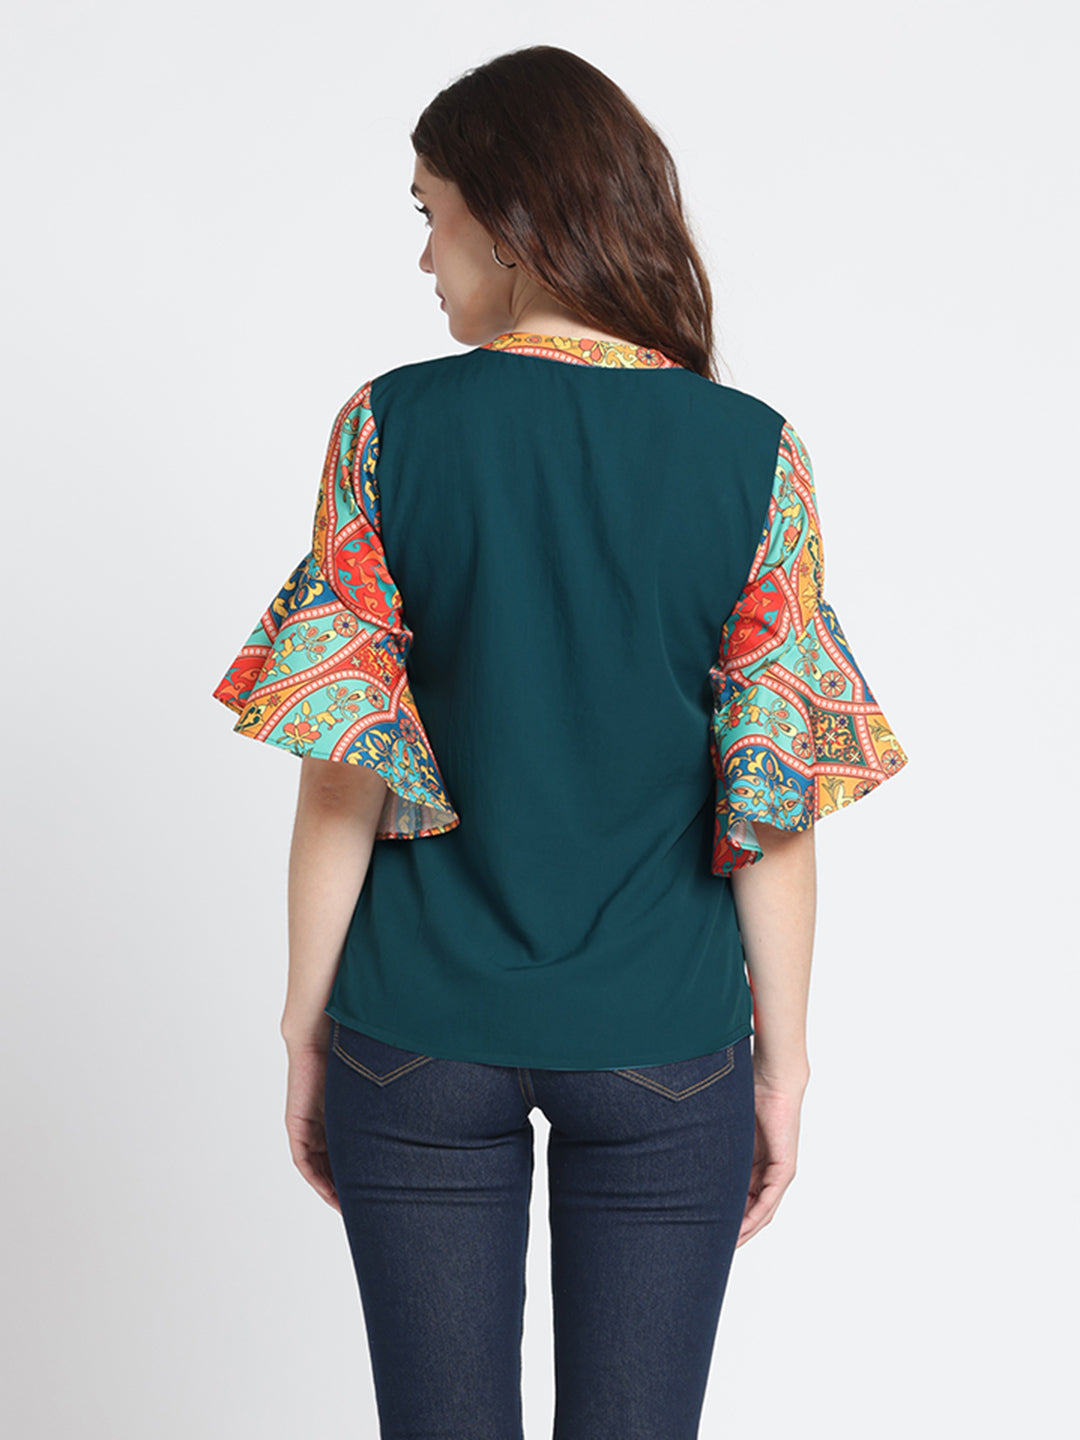 Emerald Top from Shaye , Budget Top for women